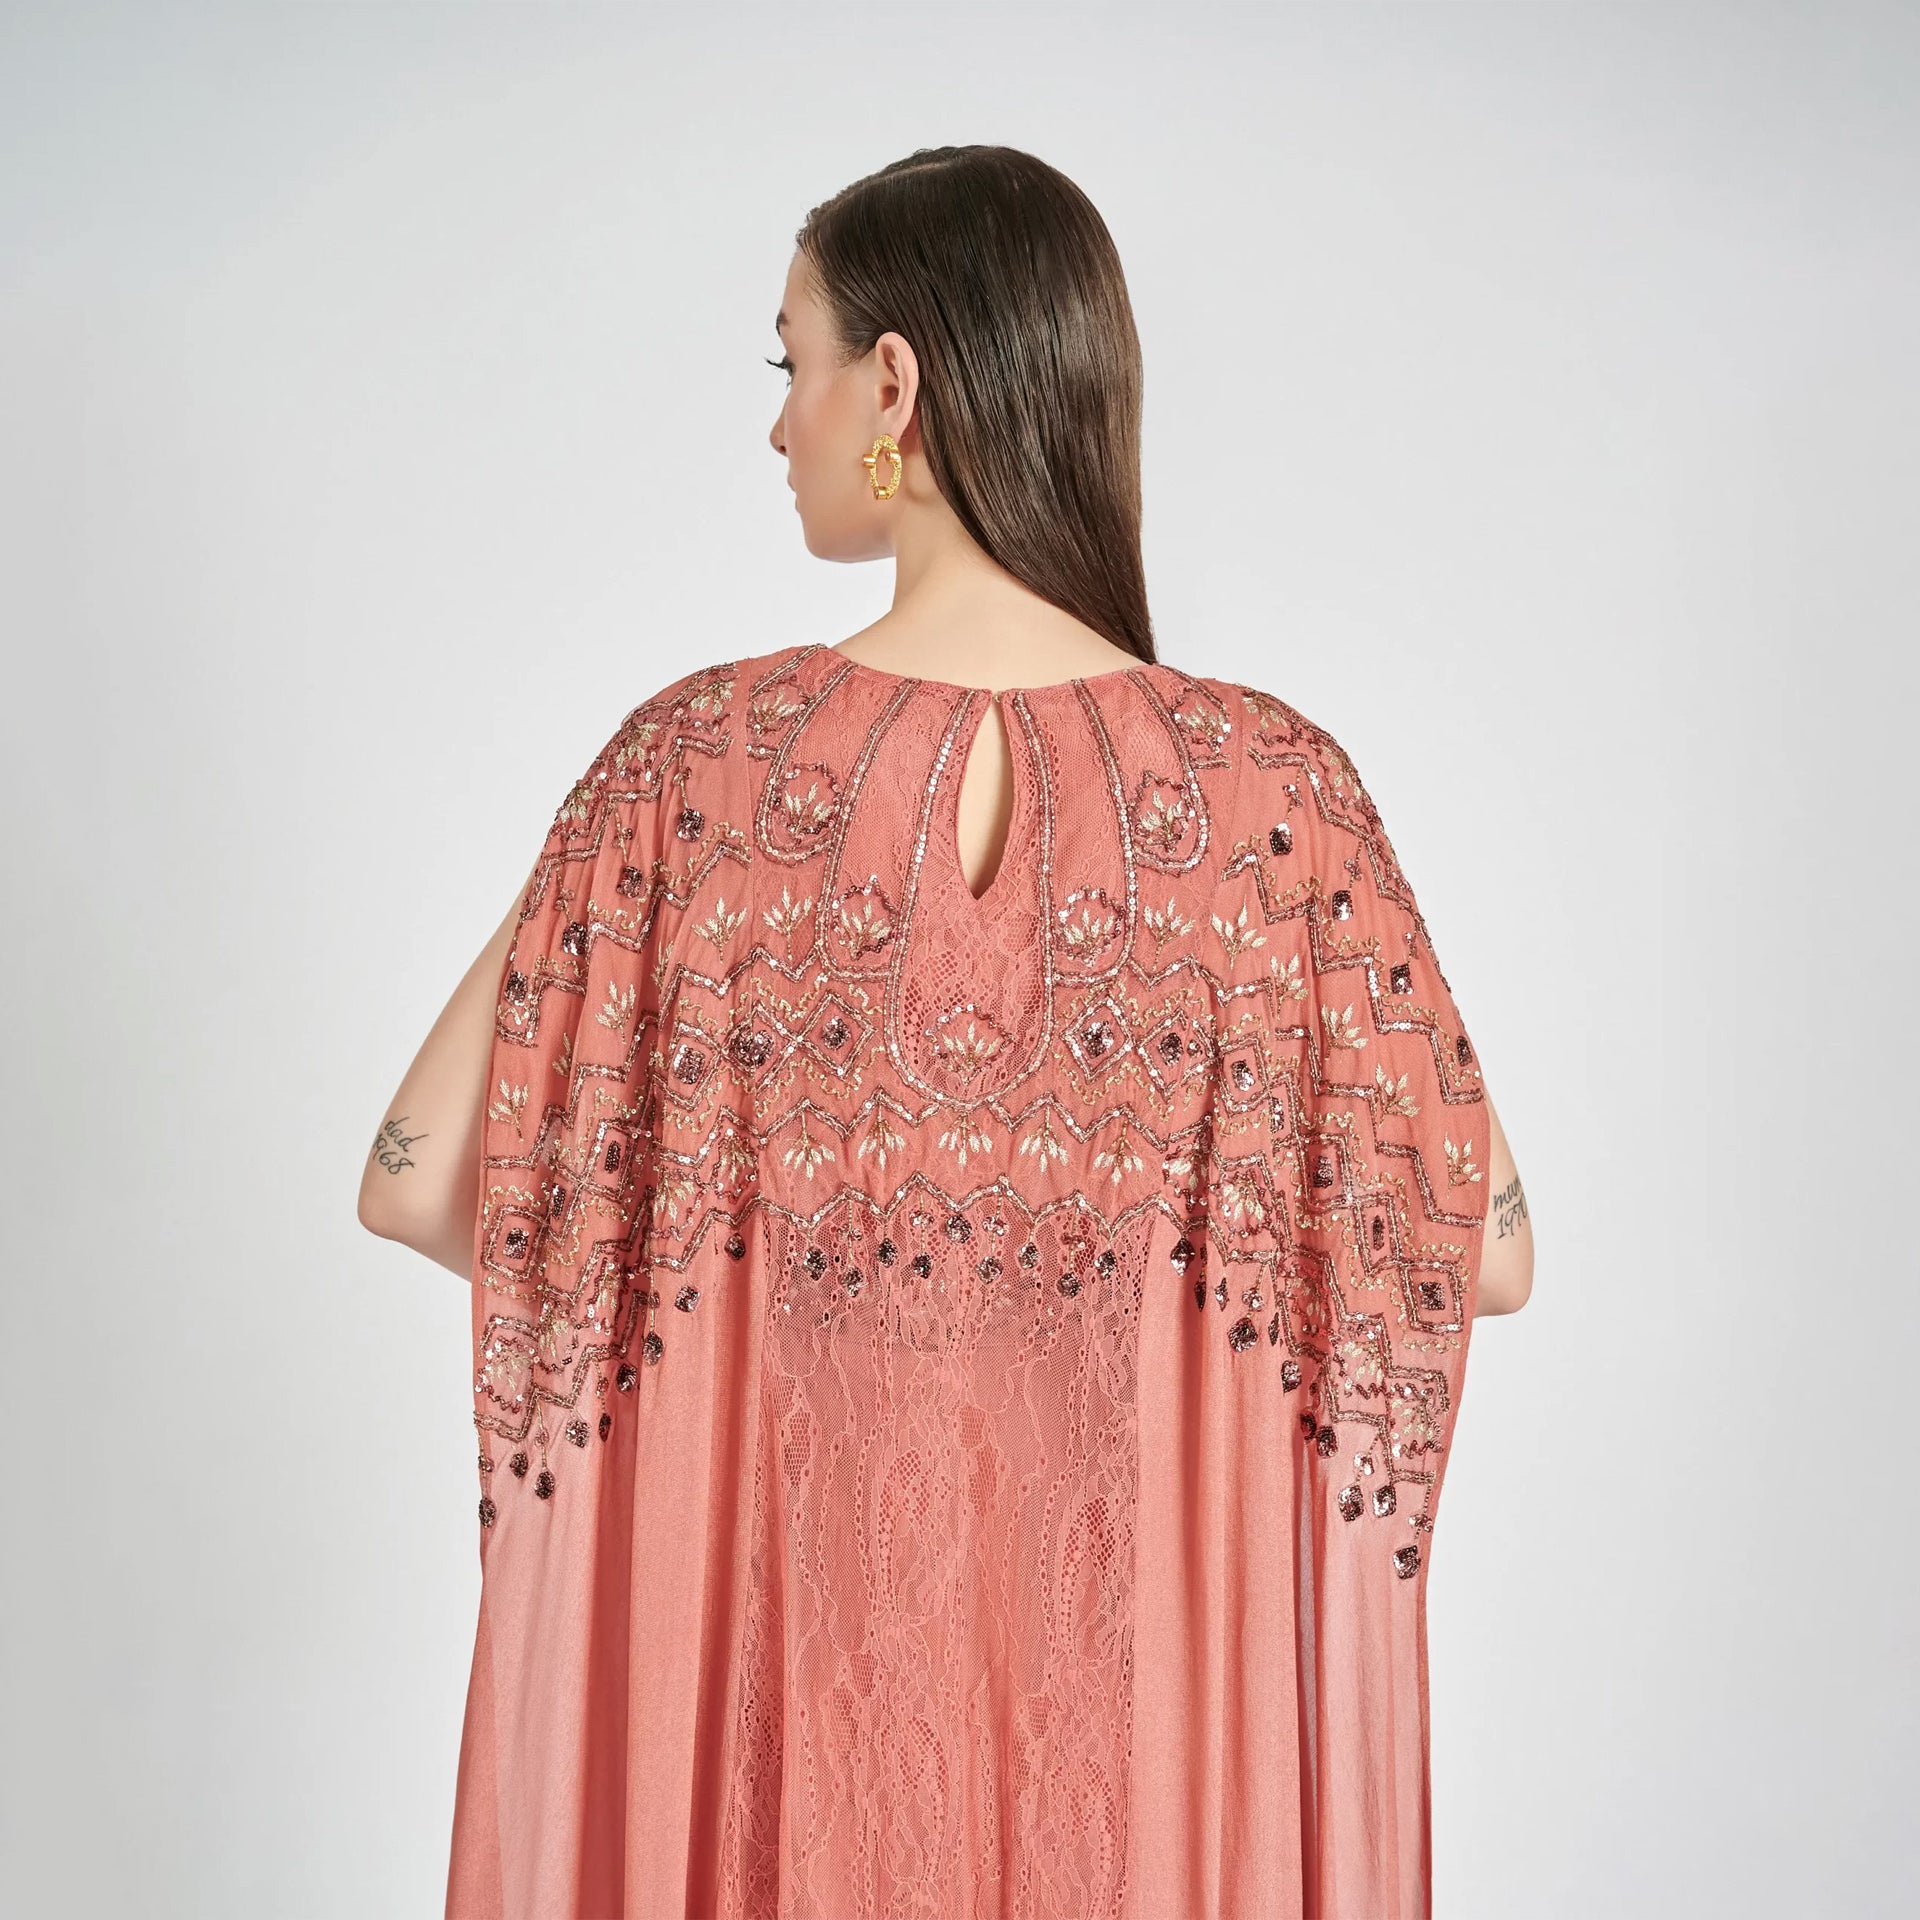 Coral Dress With Silver Embroidery From Shalky